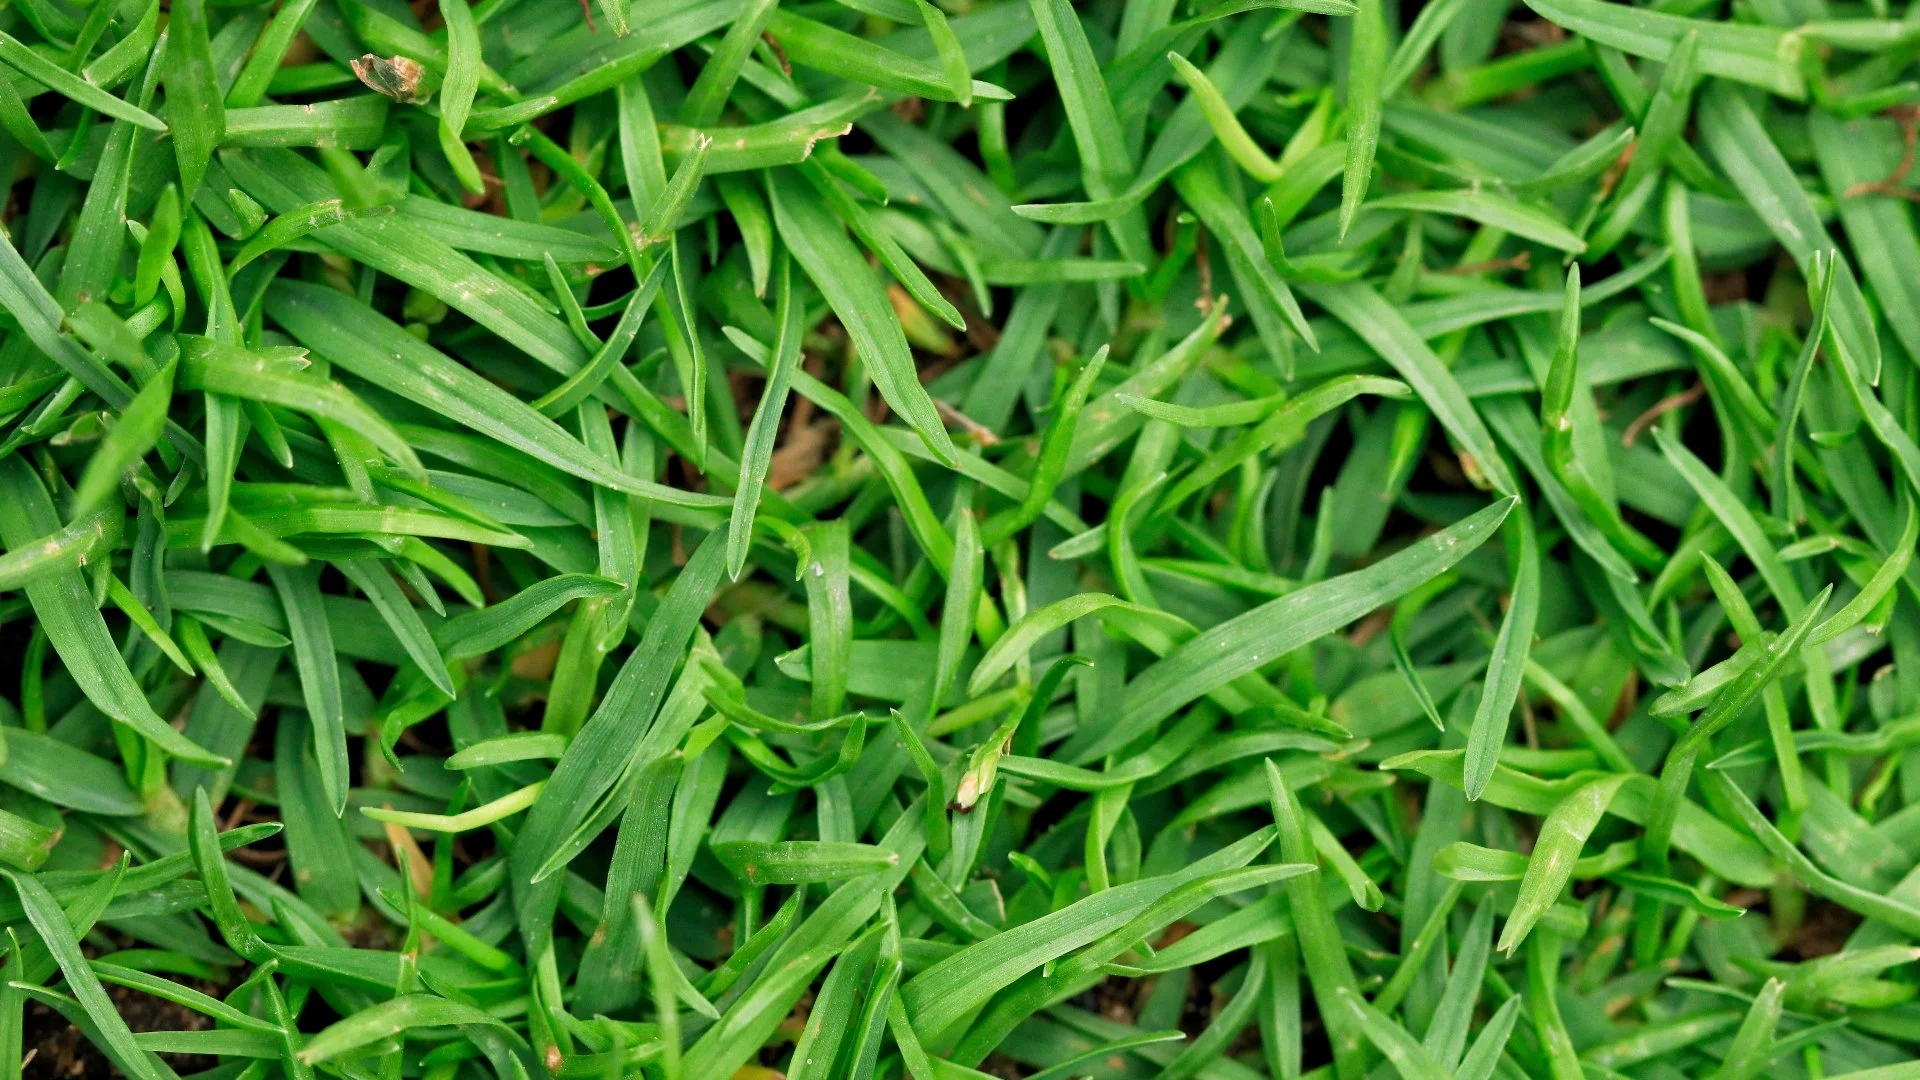 What Type of Fertilizer Is Best for Your Lawn in the Spring?